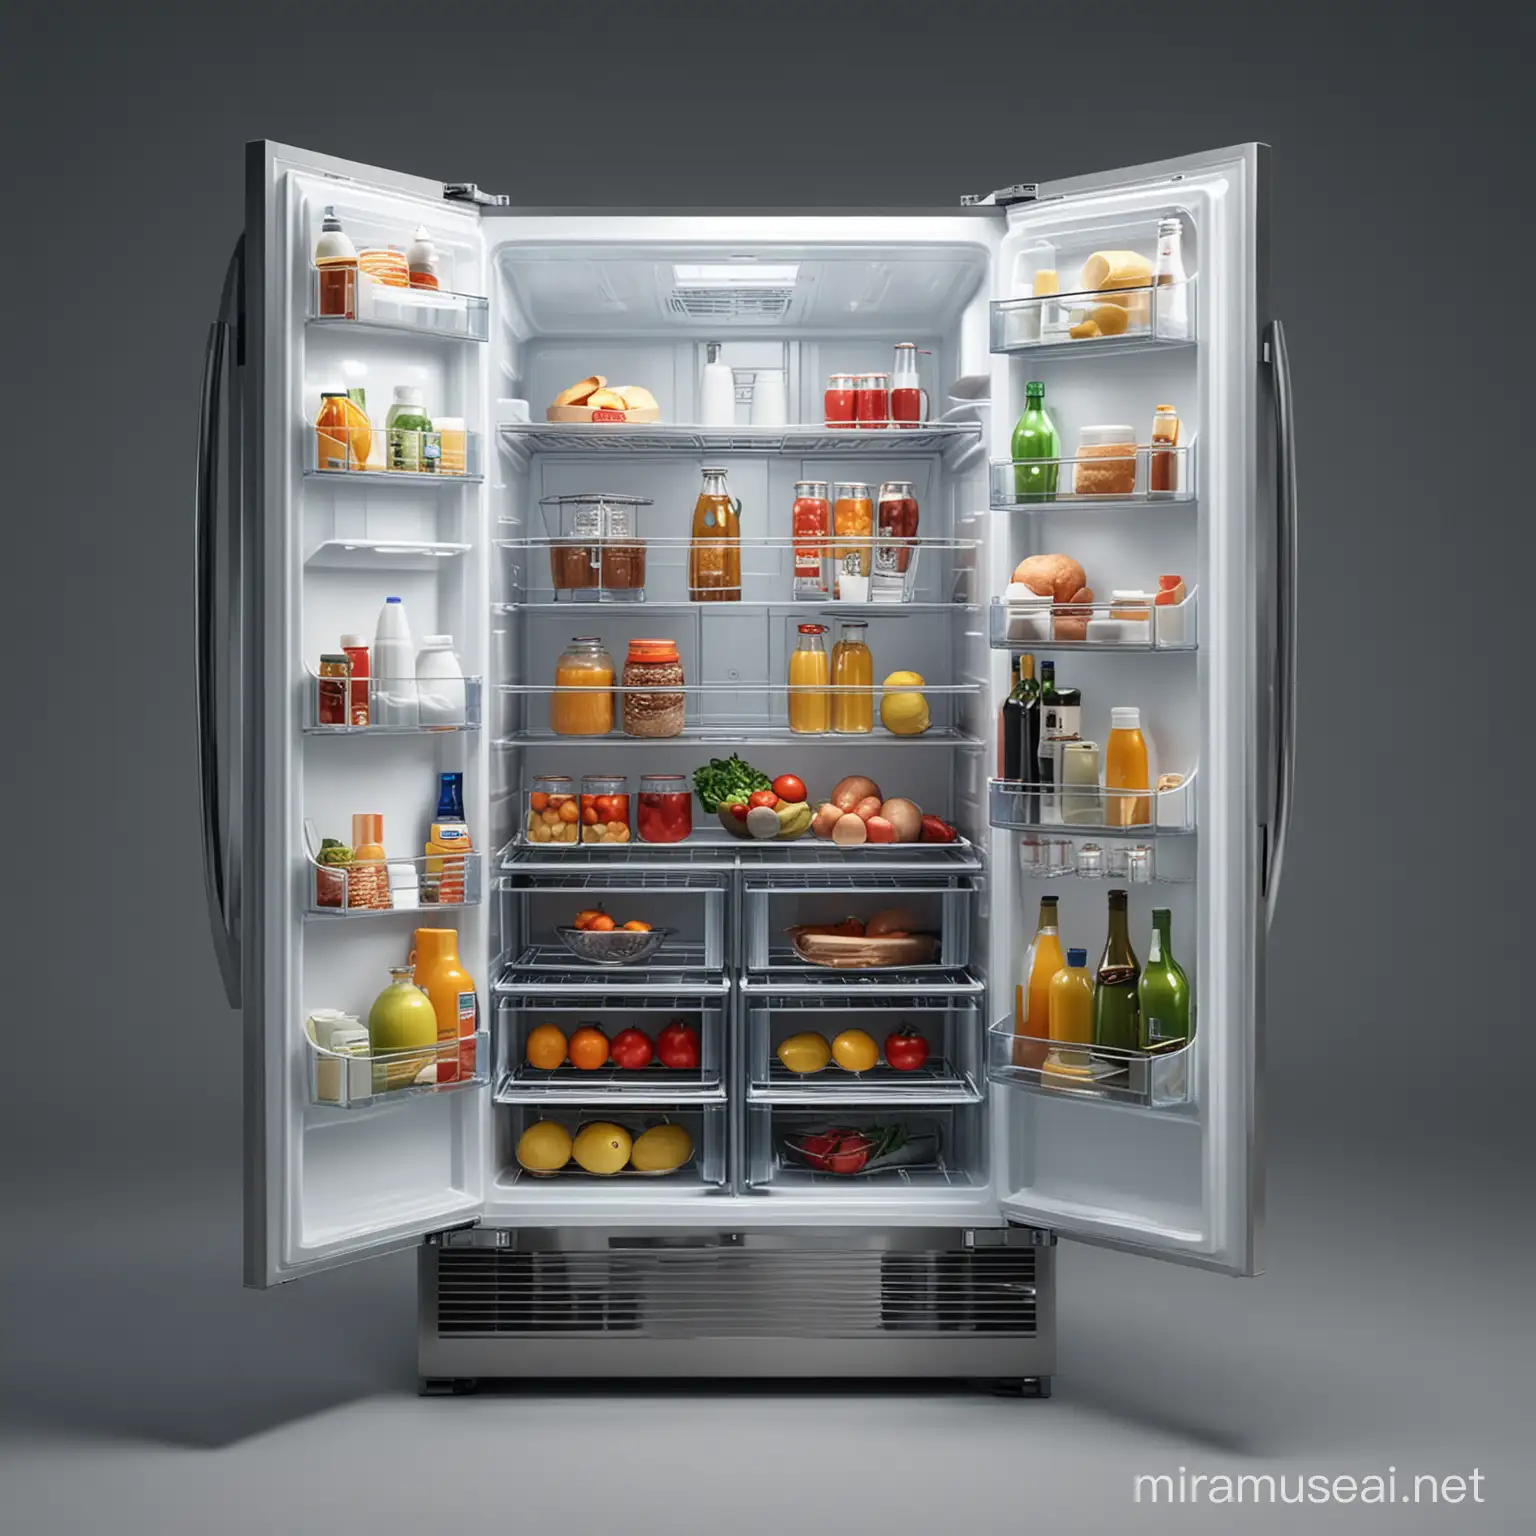 Open Photorealistic Refrigerator in the Night Kitchen